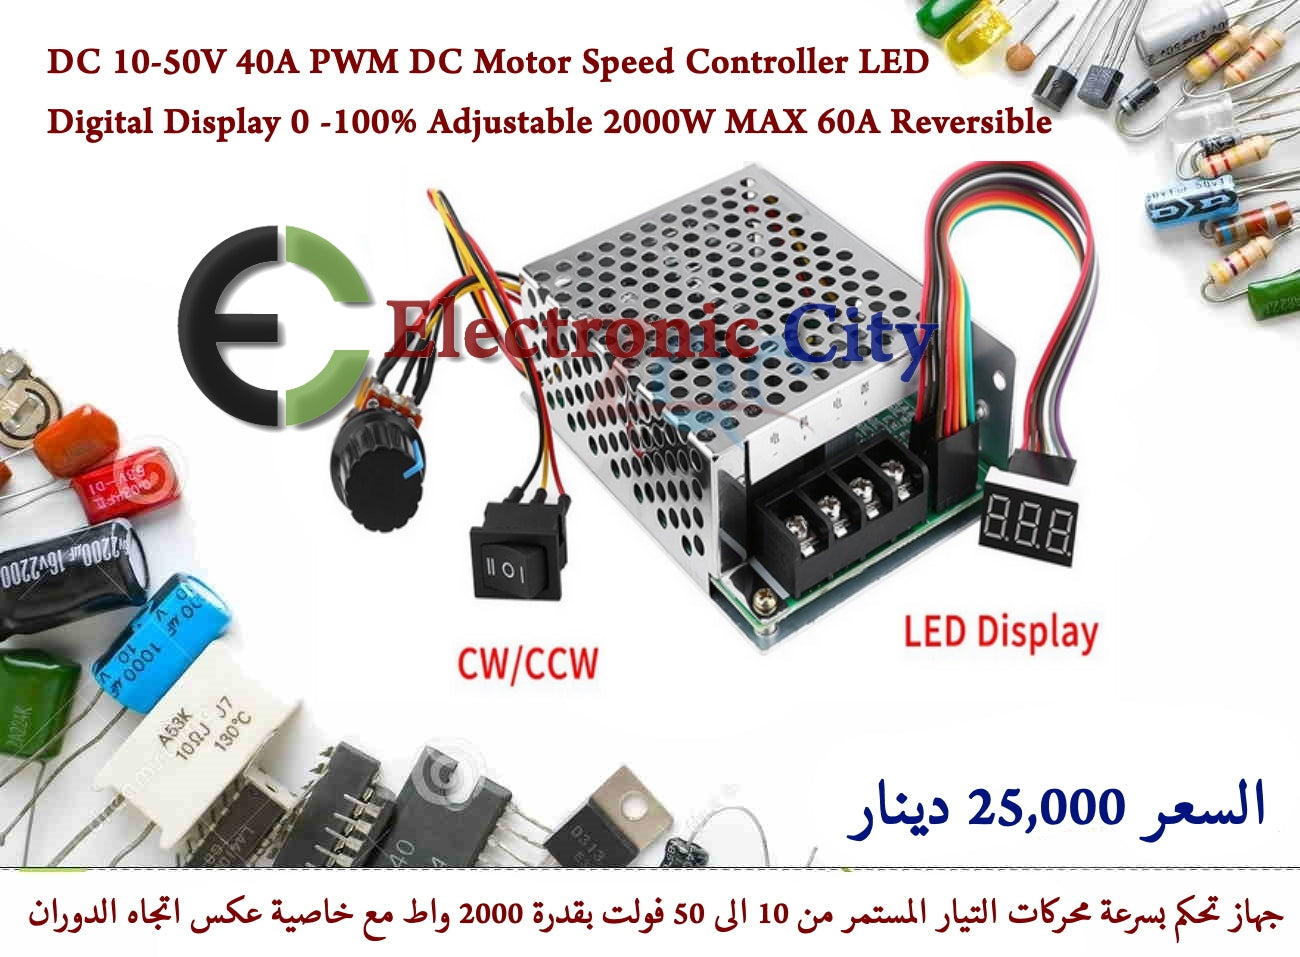 DC 10-50V 40A PWM DC Motor Speed Controller LED Digital Display 0 -100% Adjustable 2000W MAX 60A Reversible